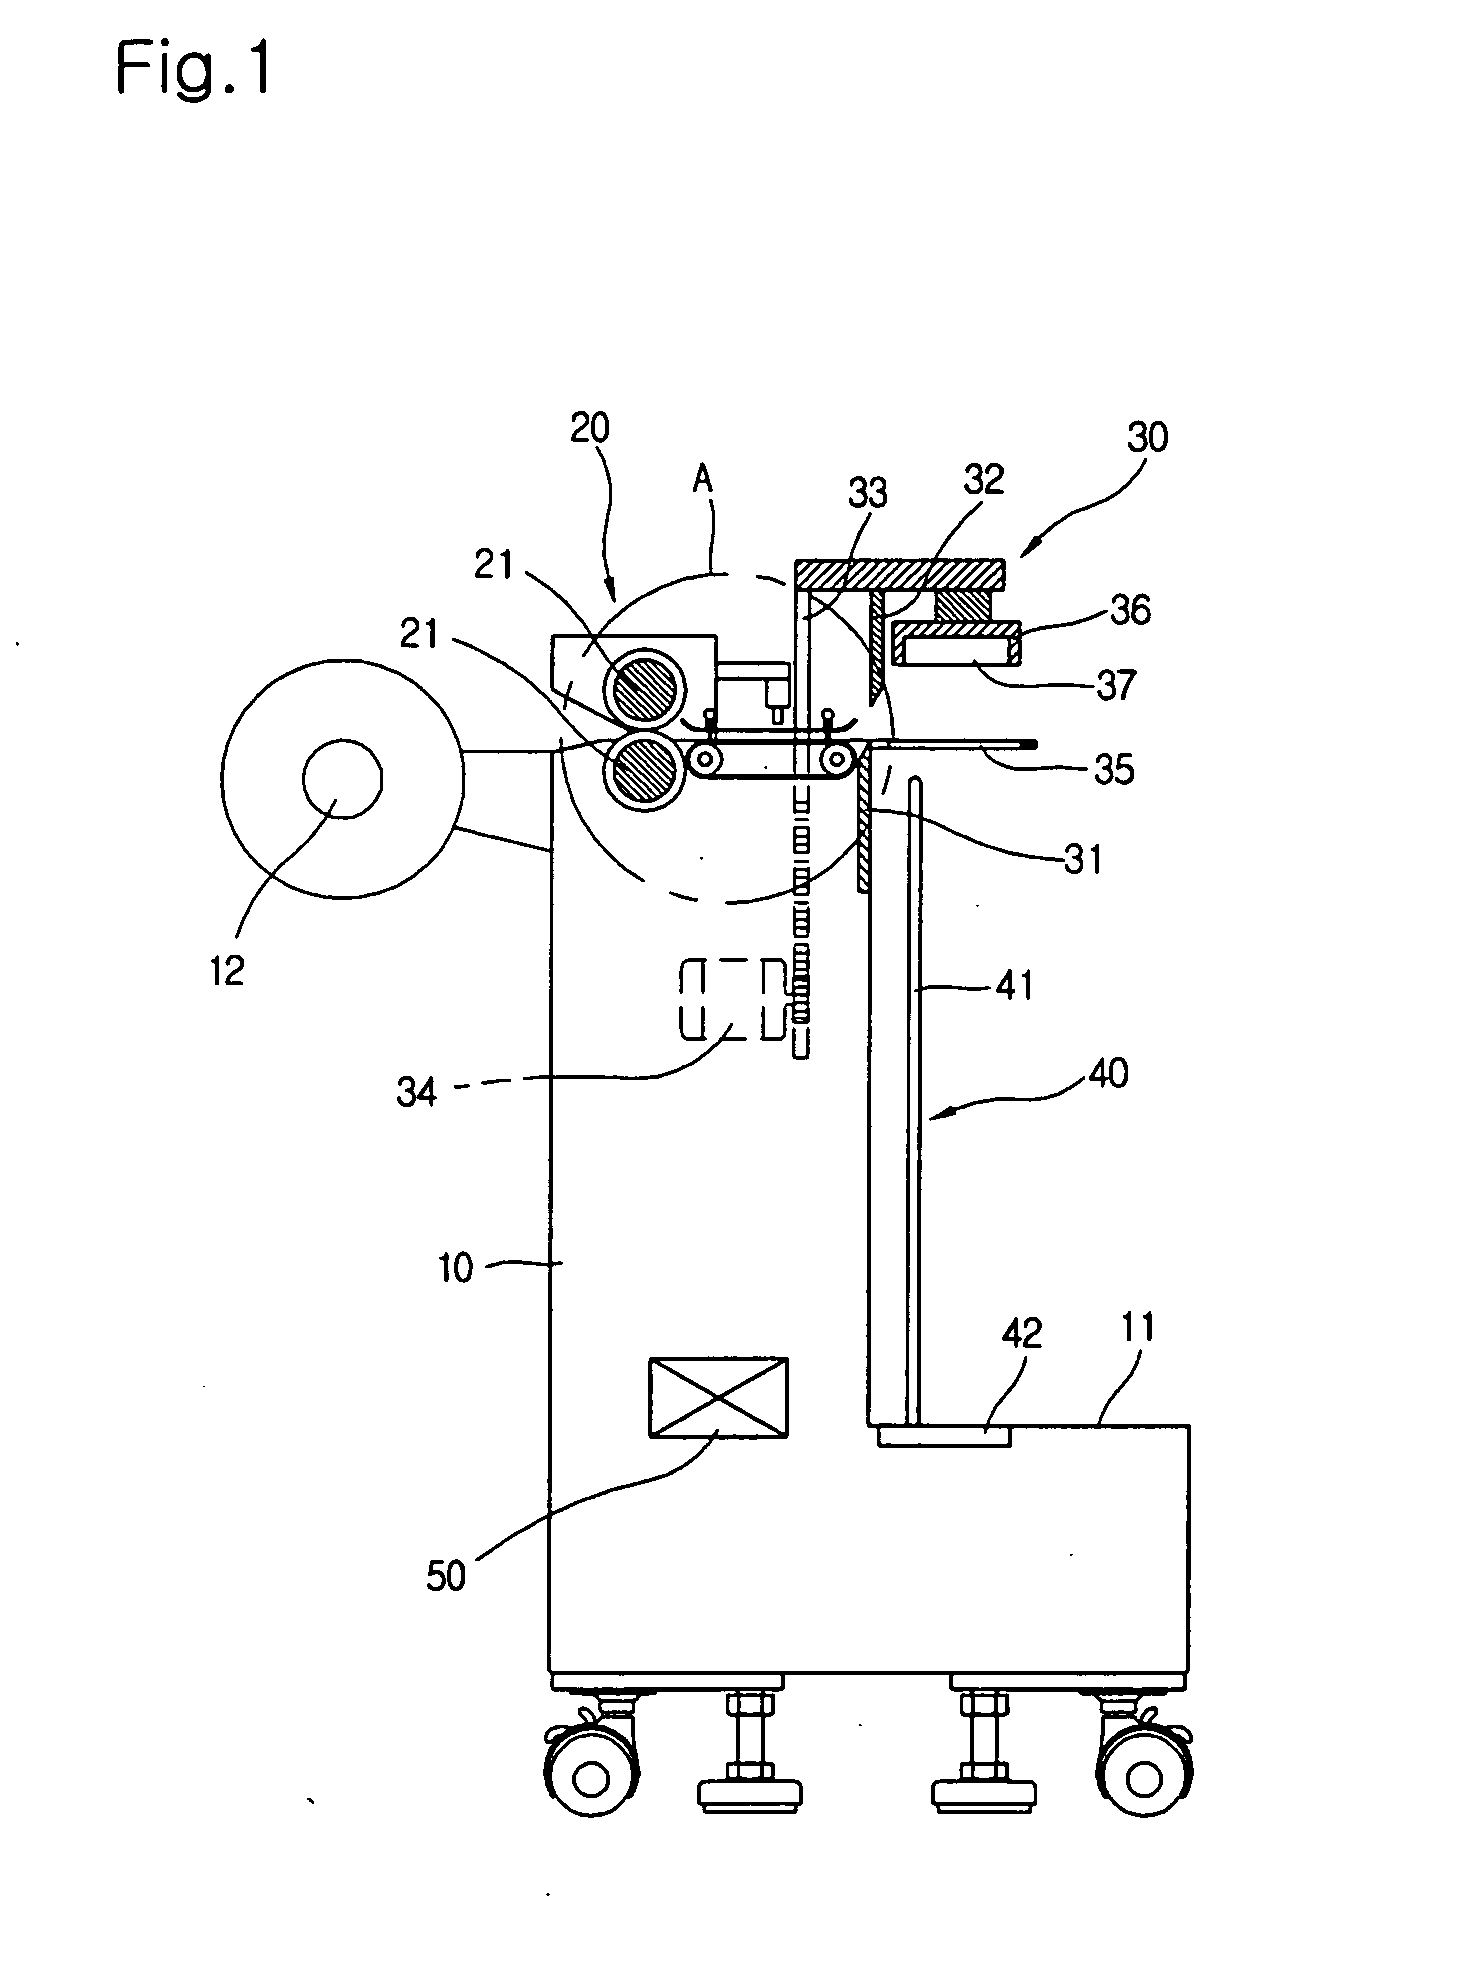 Apparatus for cutting series of medicine packets